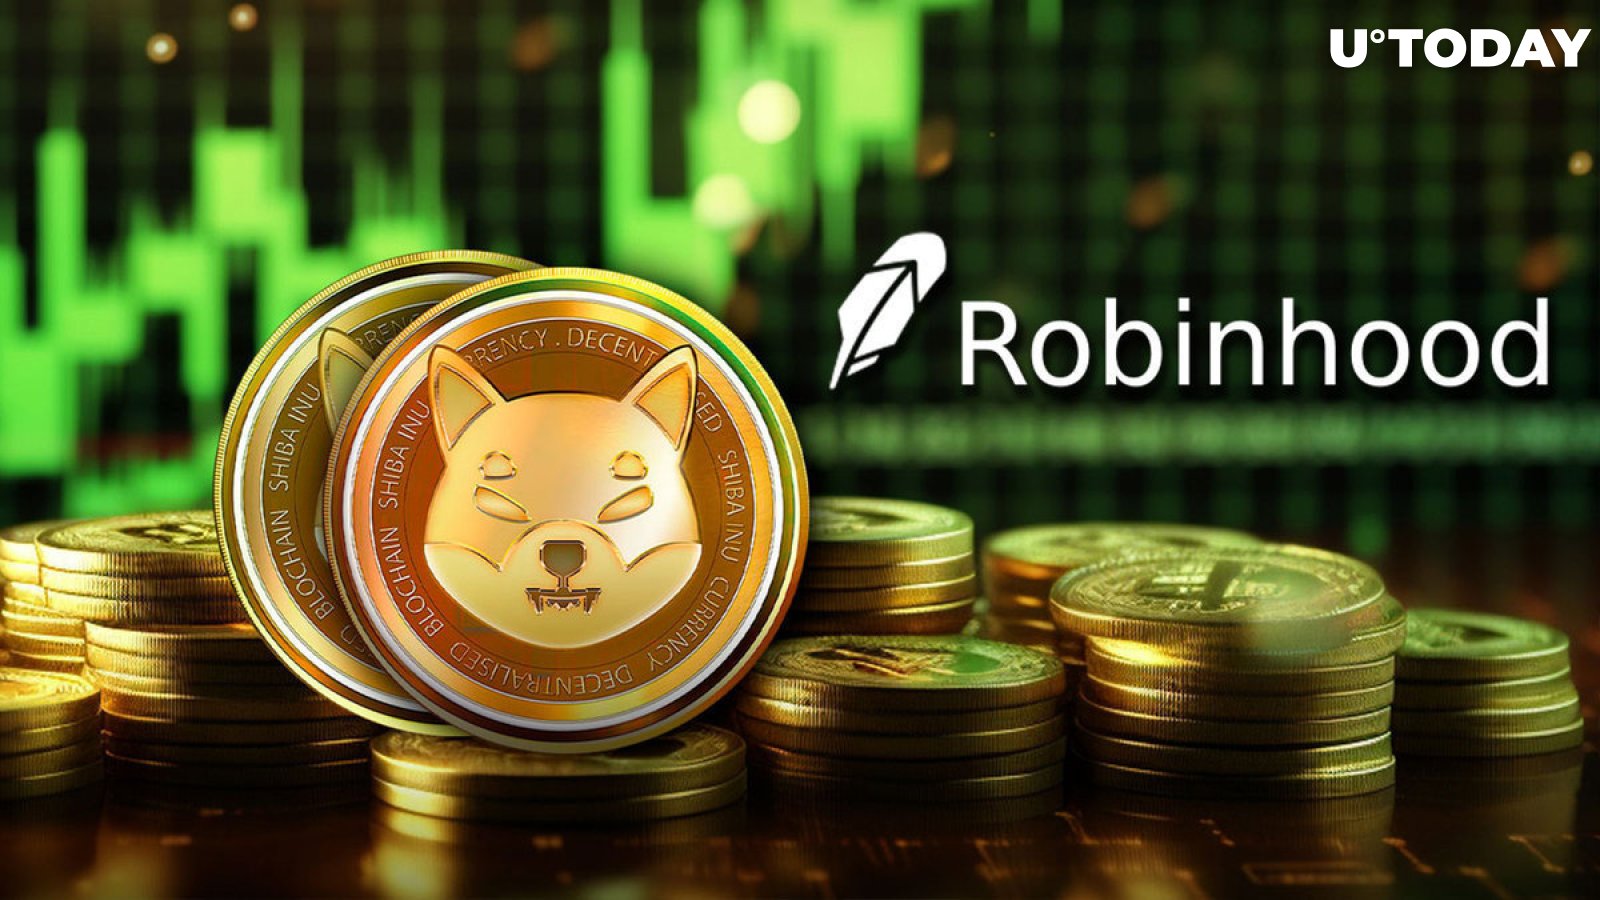 600 Billion SHIB Mysteriously Kicked disconnected  Robinhood – What's Happening?